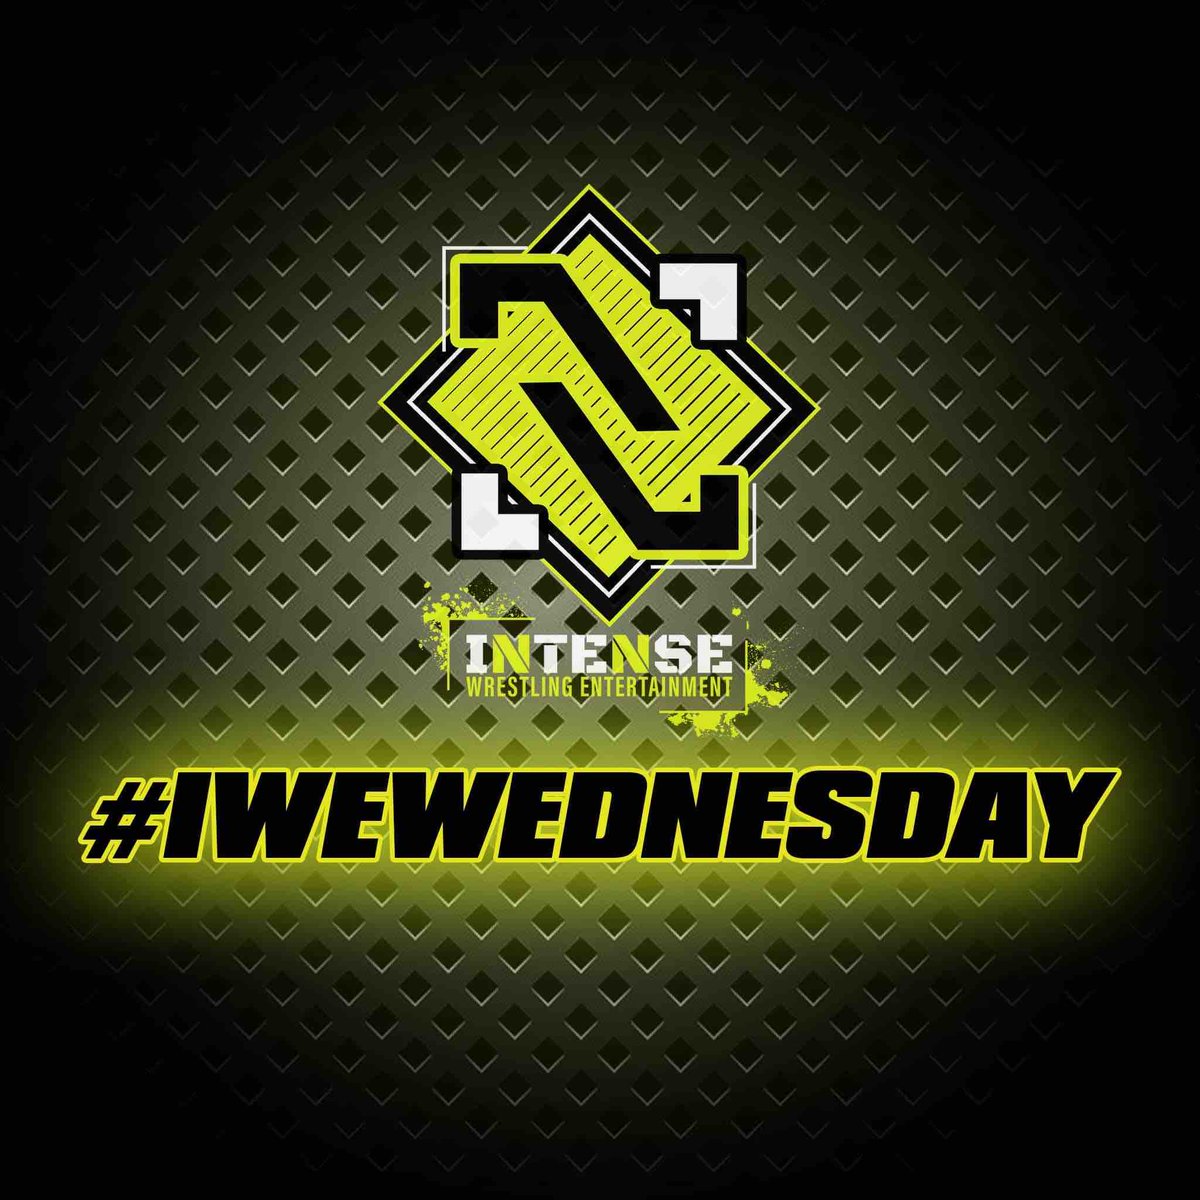 It’s #iwewednesday!! We have 3 Announcements dropping today!!
8 am
6 pm 
8 pm
It’s going to be a fun ride!!